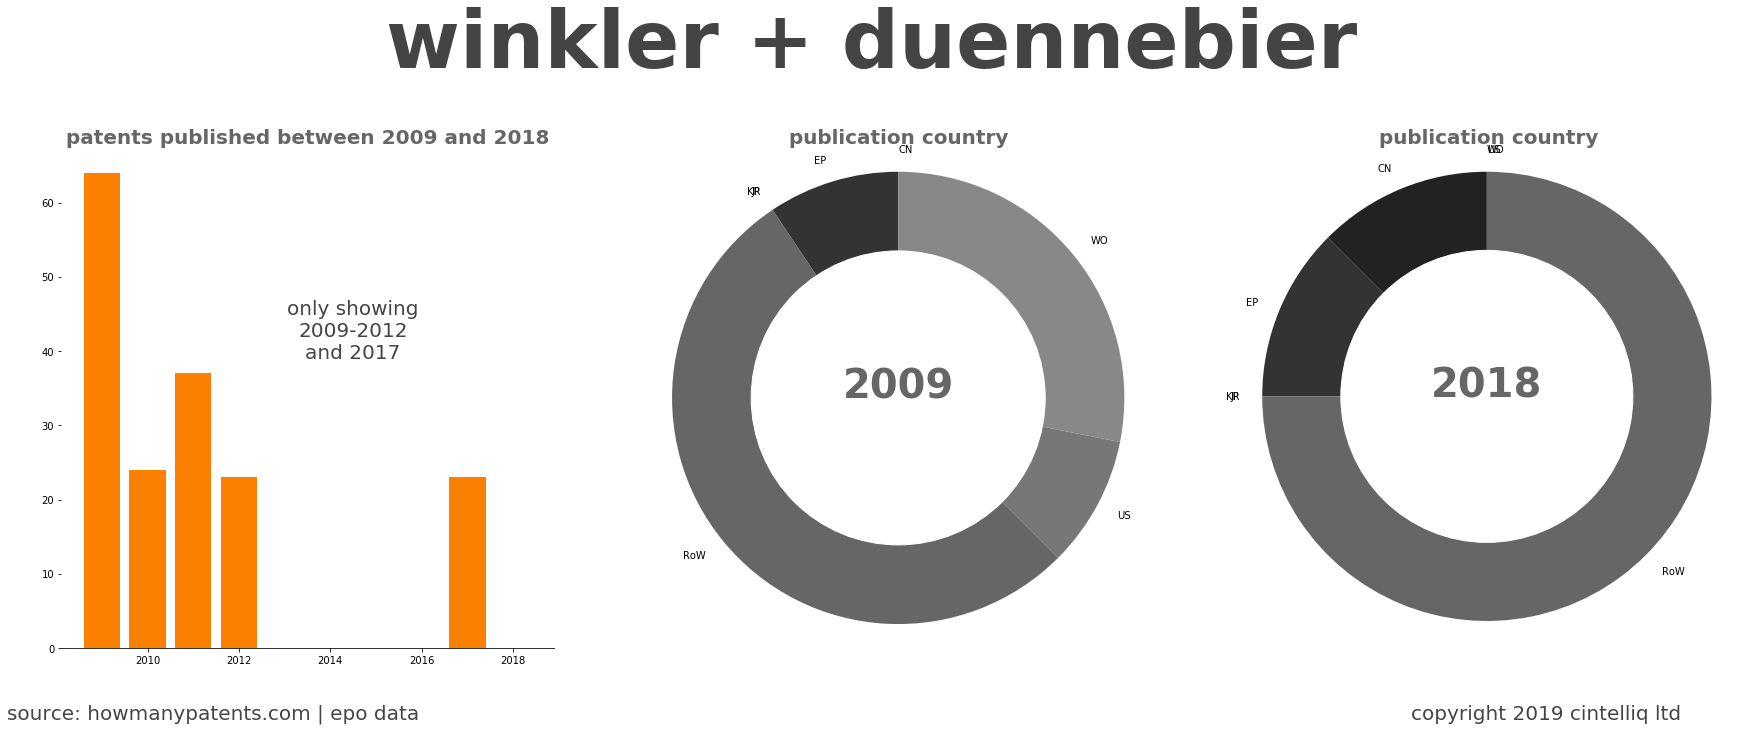 summary of patents for Winkler + Duennebier